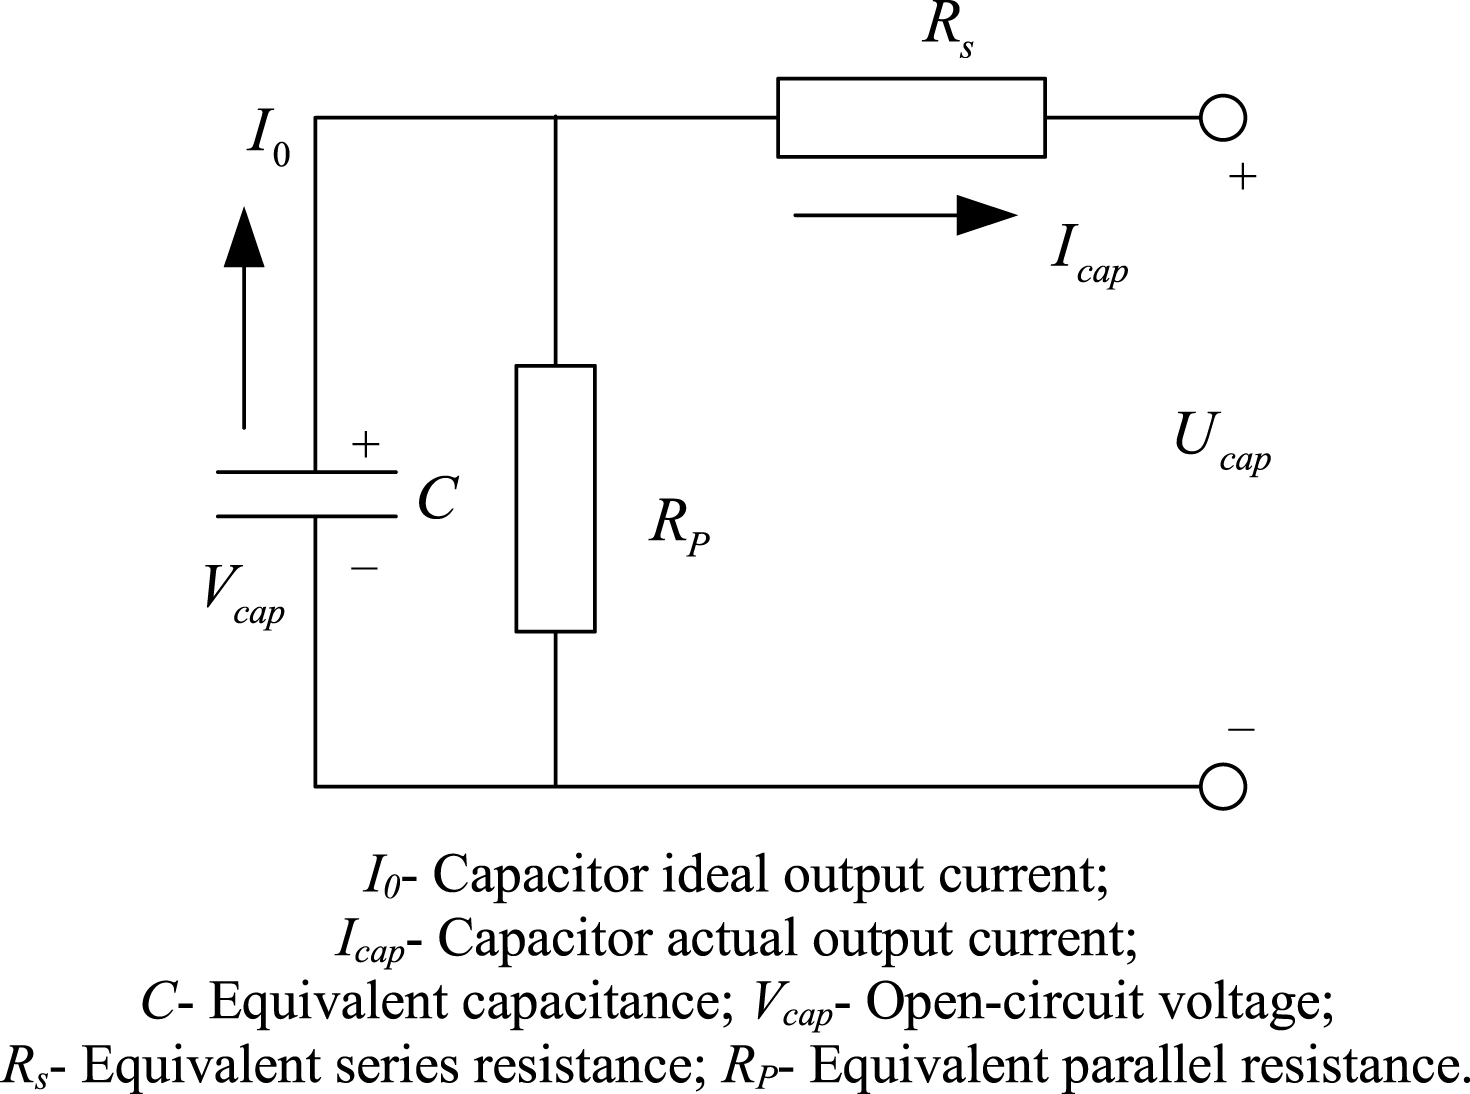 Equivalent RC model of the supercapacitor.